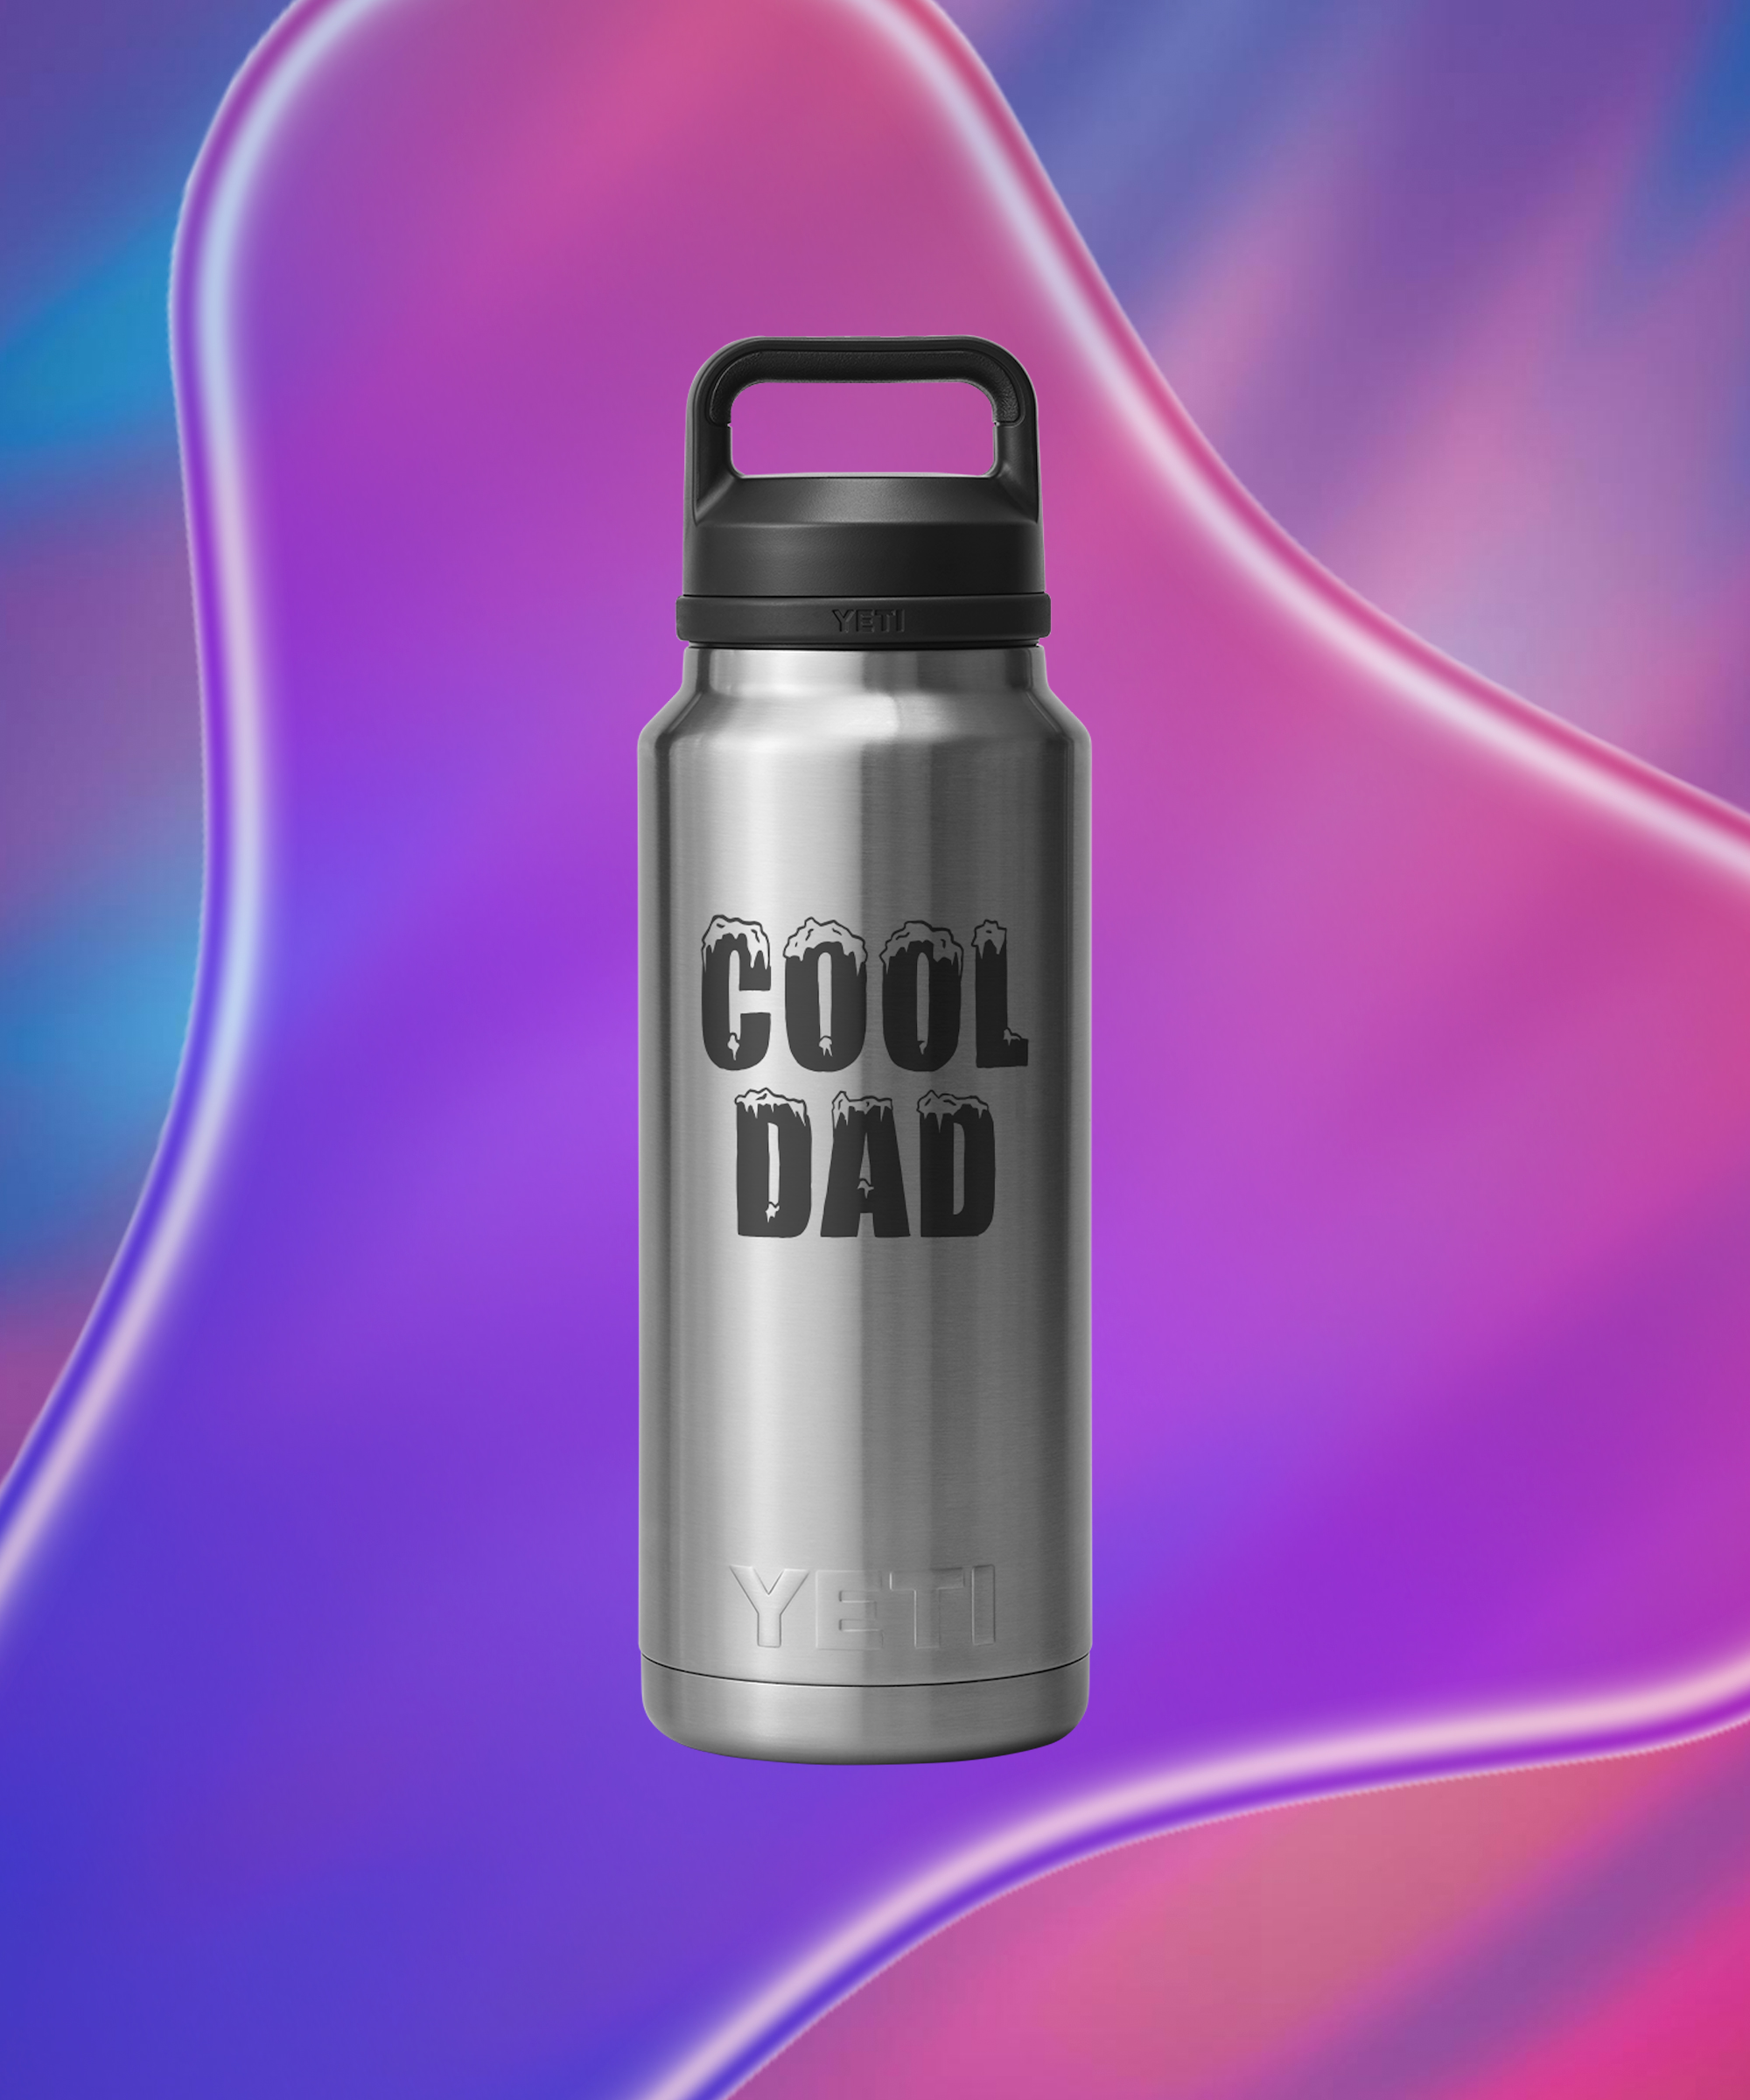 10 Best Local Gift Ideas for Dad | House of Mana Up